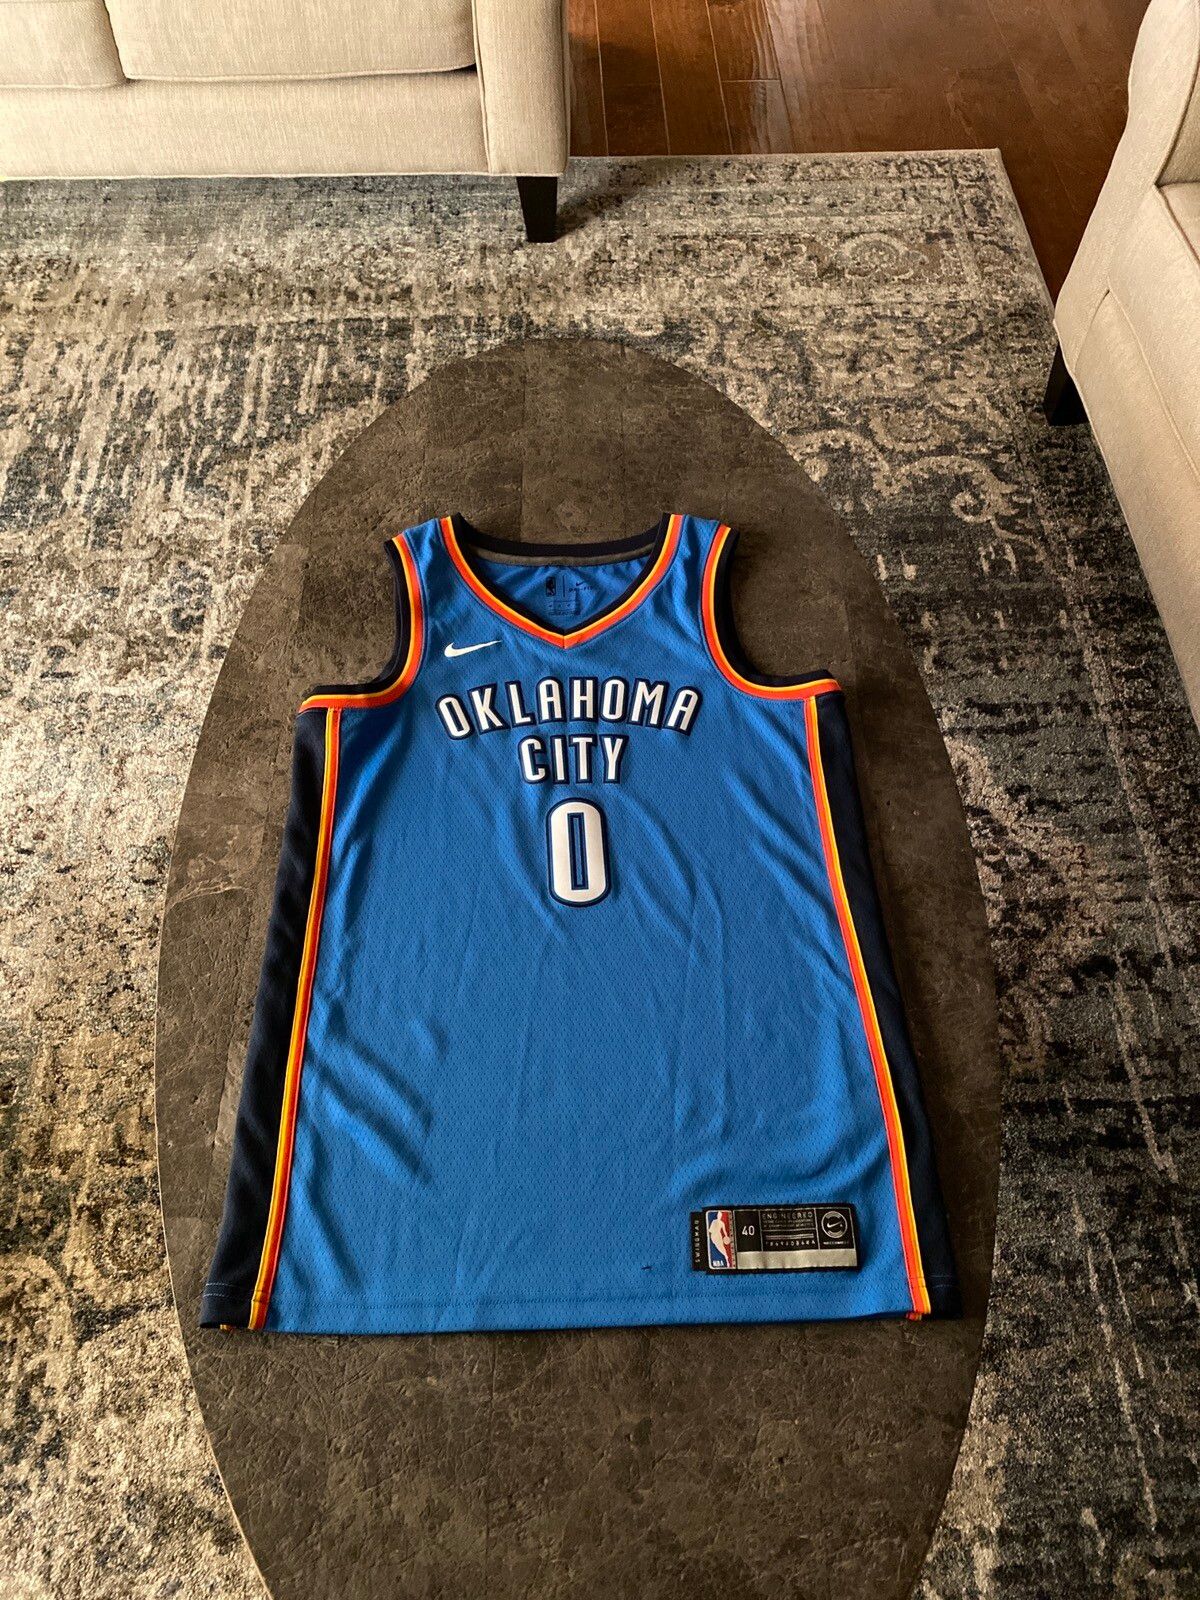 Nike Nike OKC Russell Westbrook Jersey Size US S / EU 44-46 / 1 - 1 Preview